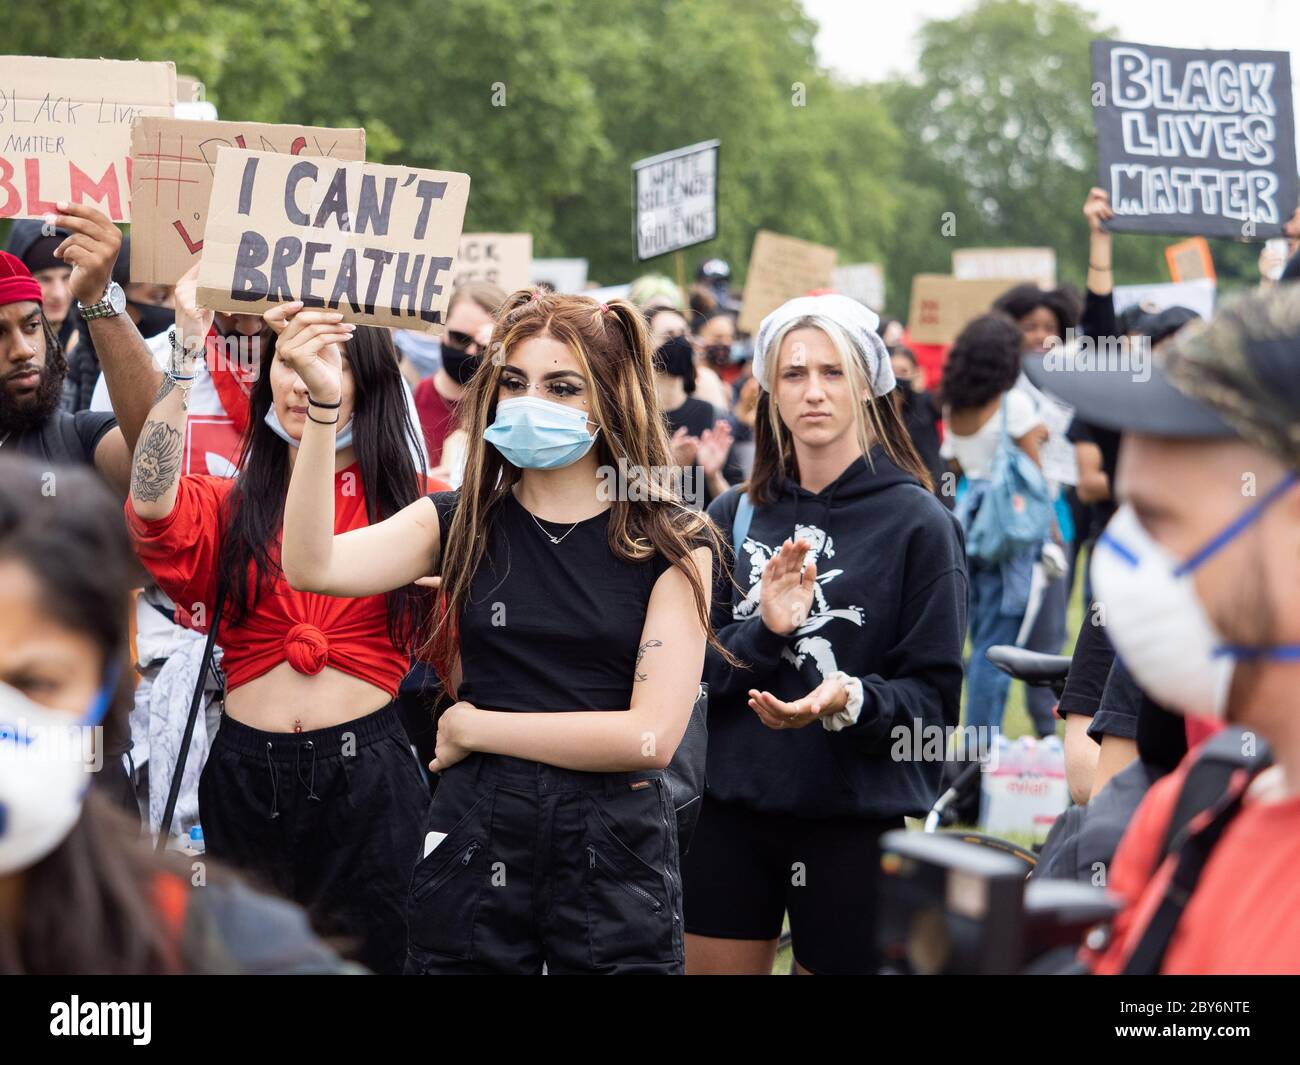 hyde park halloween 2020 London Uk 3 June 2020 Black Lives Matter Protesters Marched From Hyde Park To Parliament Following The Death In Custody Of George Floyd Stock Photo Alamy hyde park halloween 2020